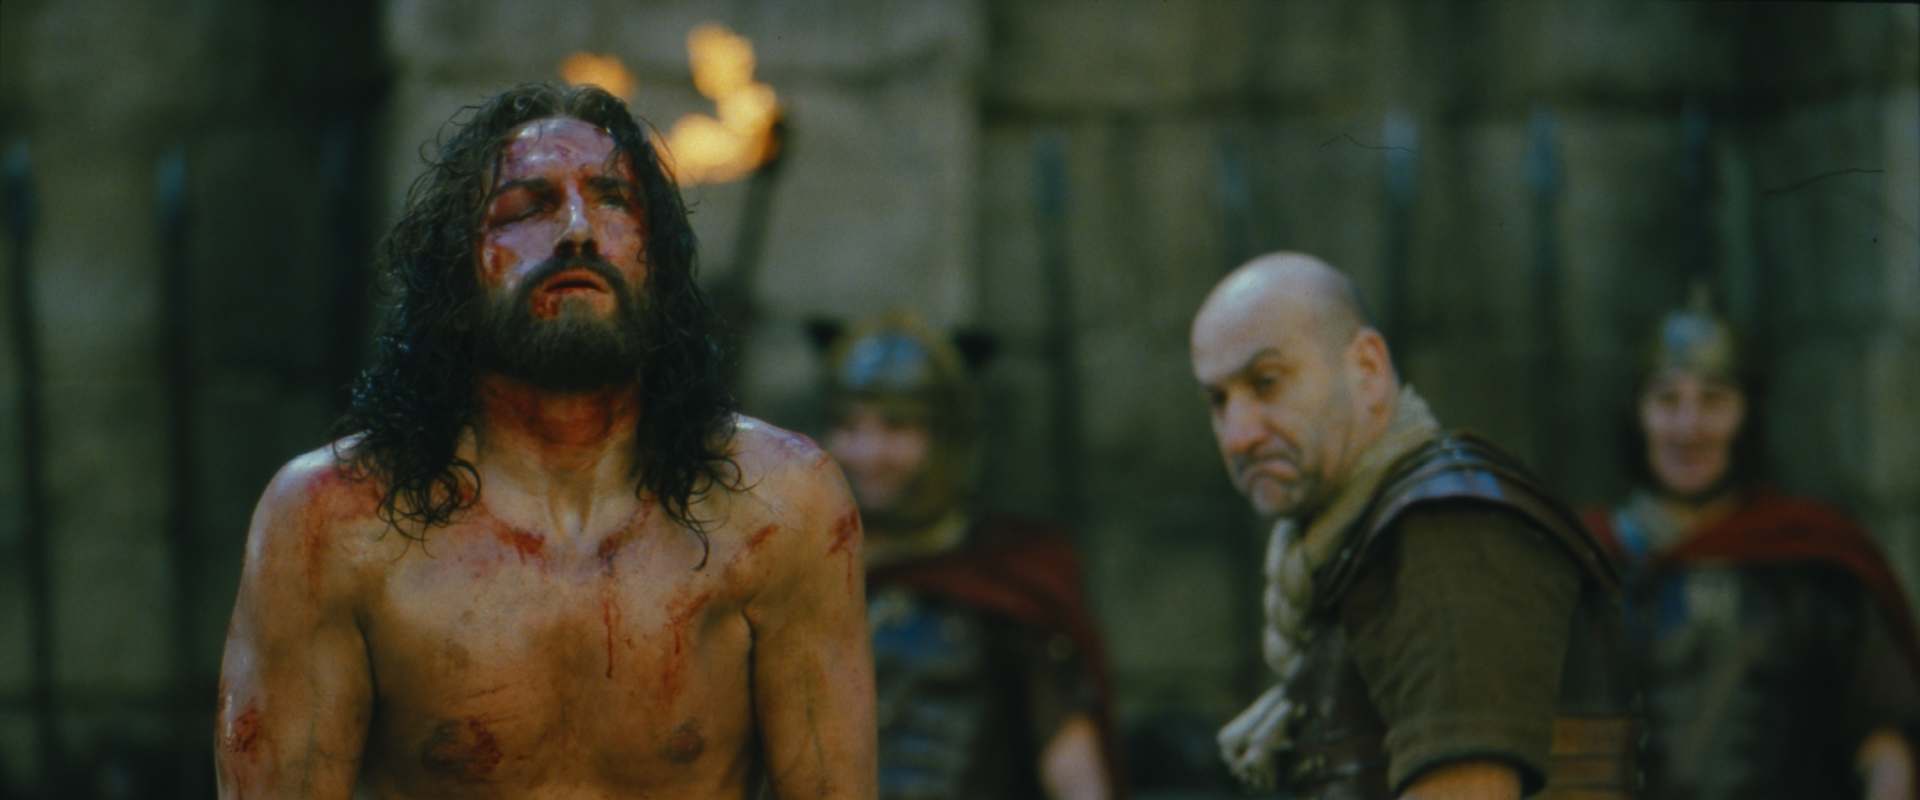 watch the passion of christ full movie english